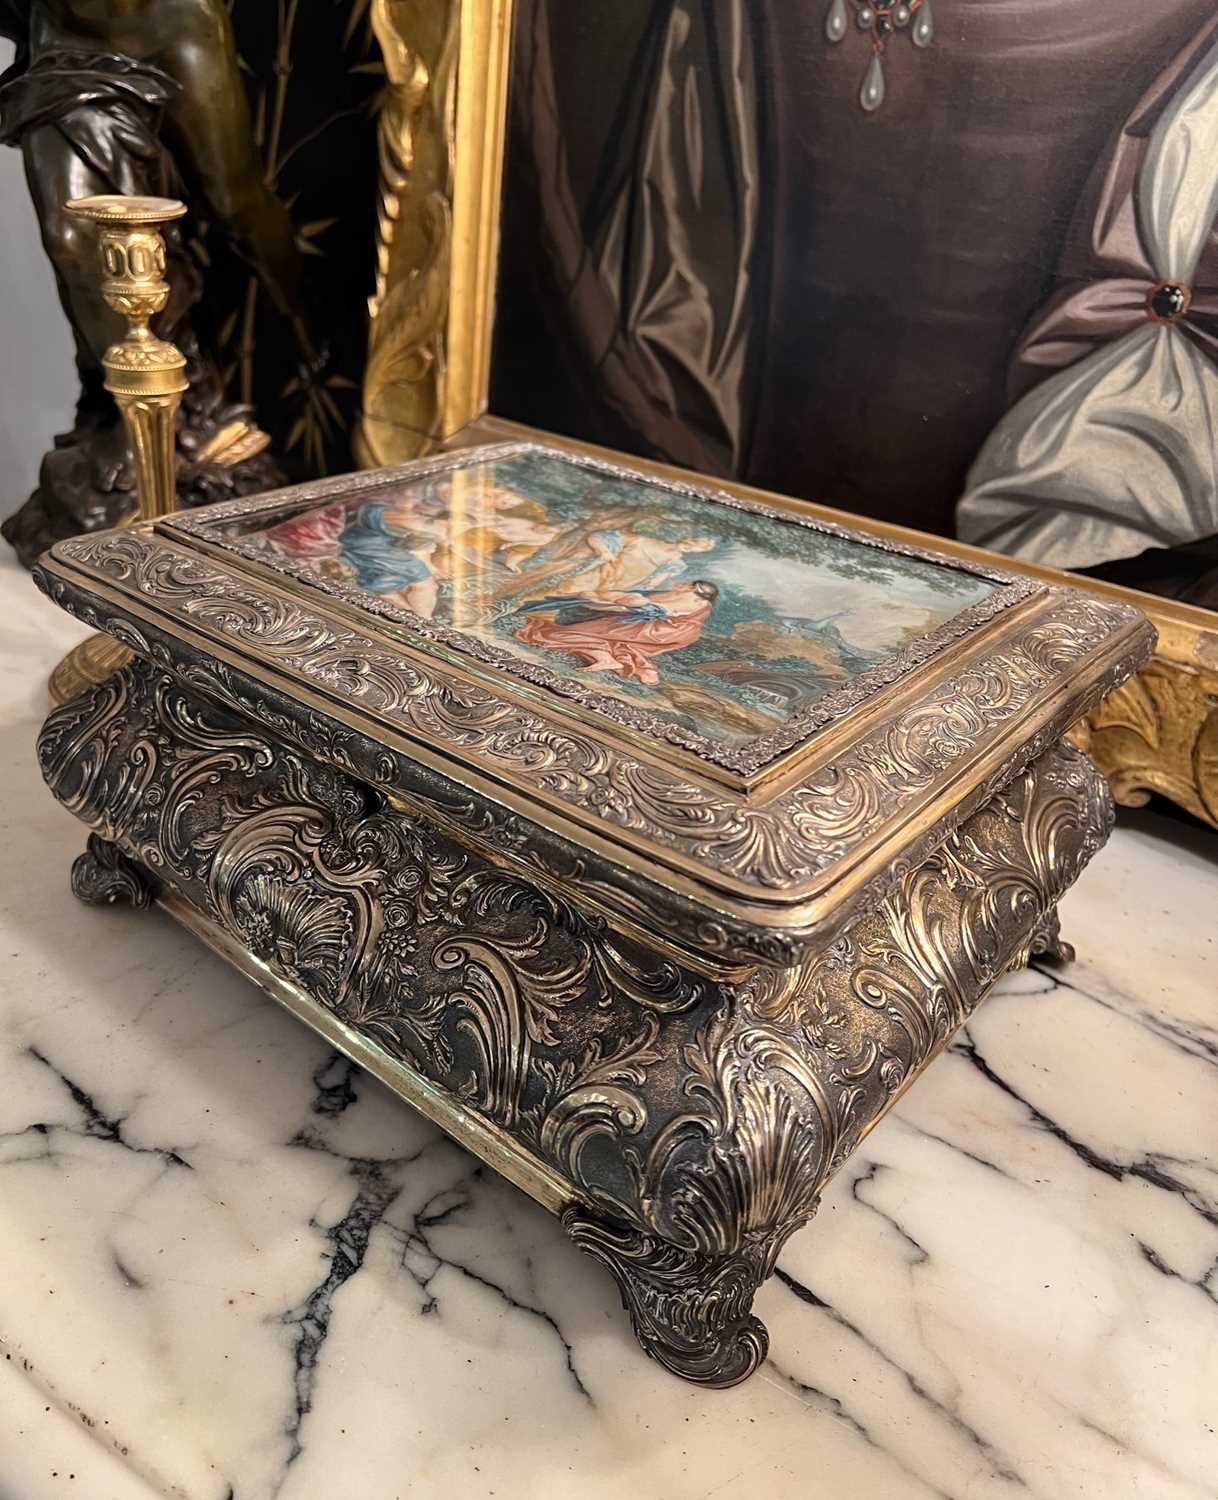 AN 18TH / 19TH CENTURY SILVER, SILVER GILT AND PAINTED TABLE CASKET - Image 12 of 15